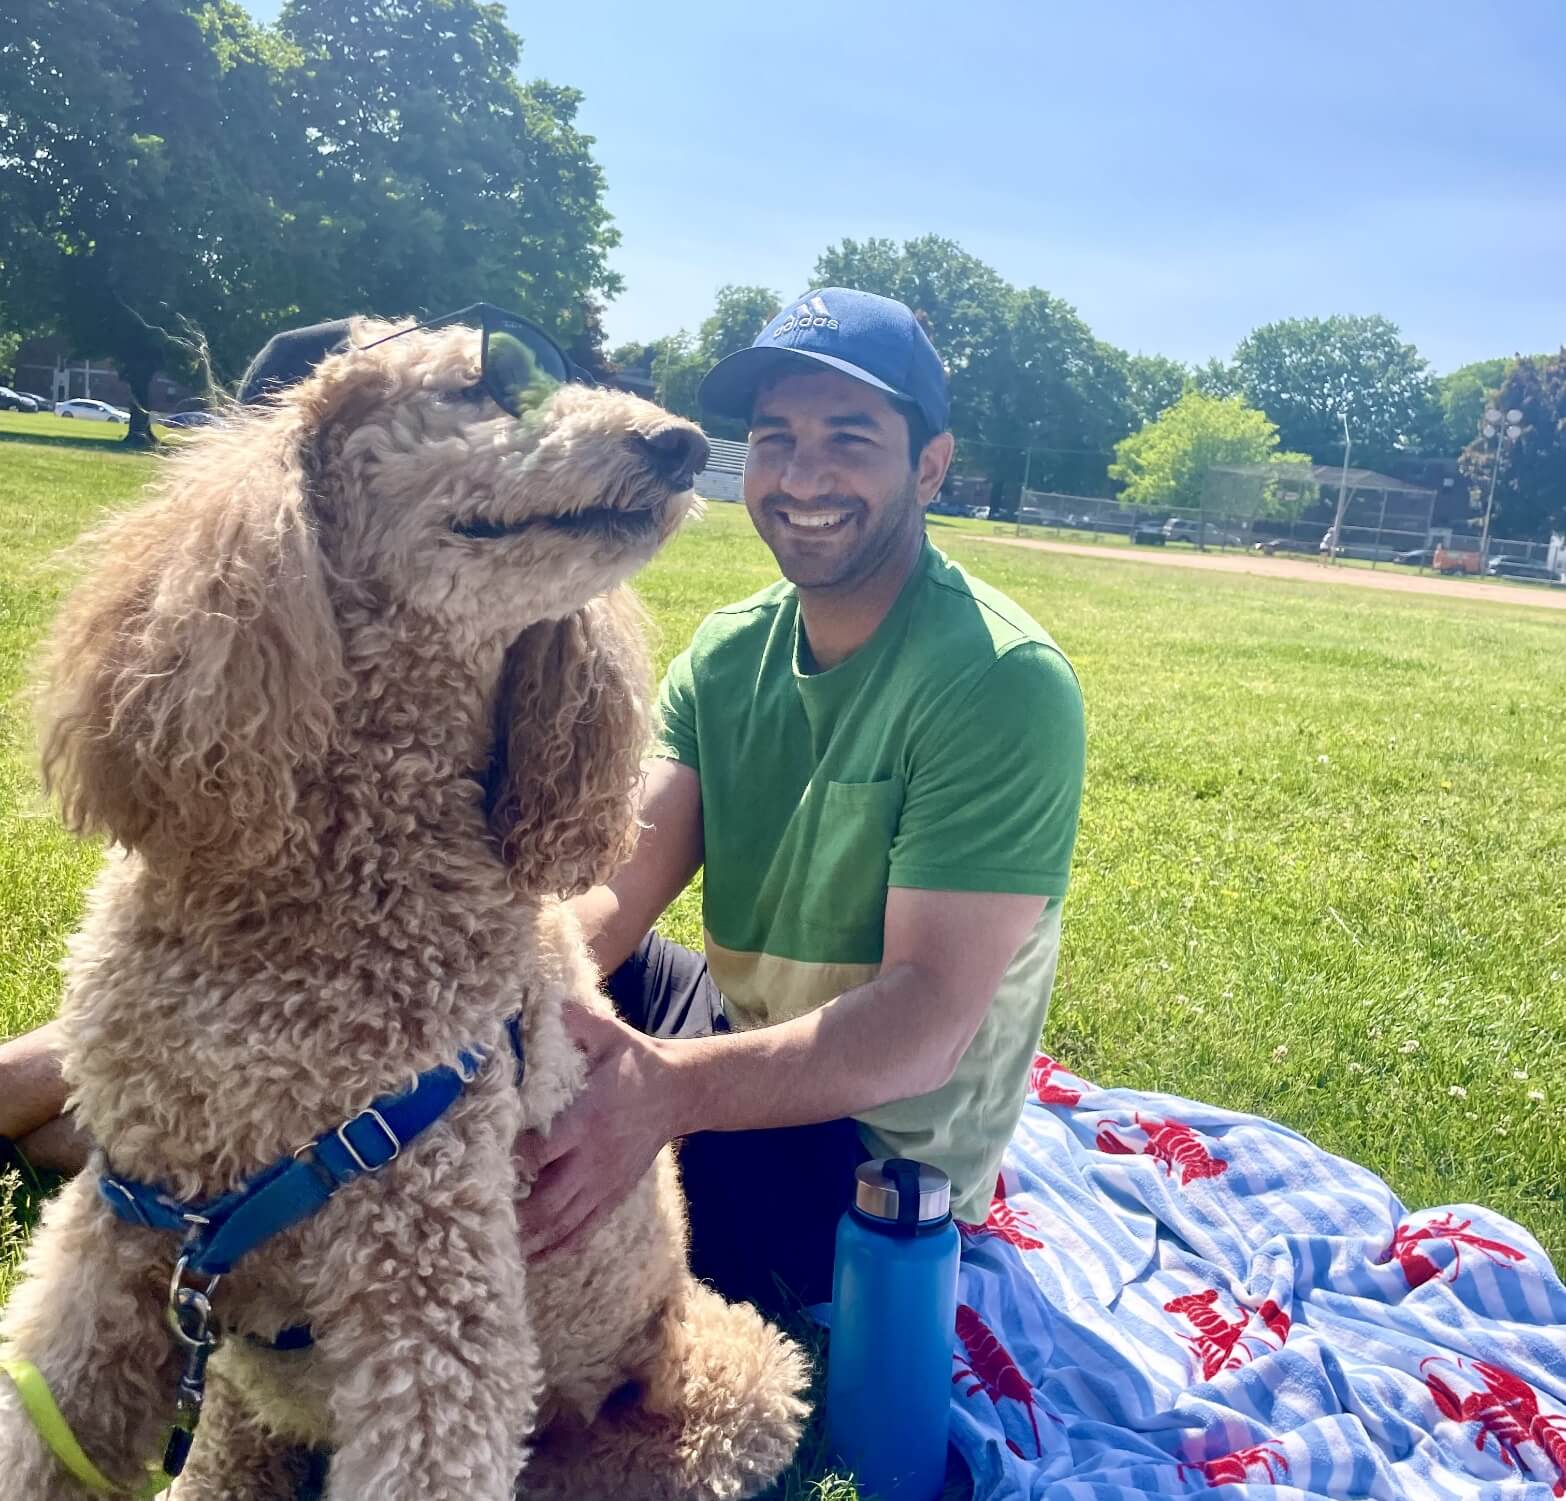 Doctor Foroughi petting his fluffy dog while at picnic